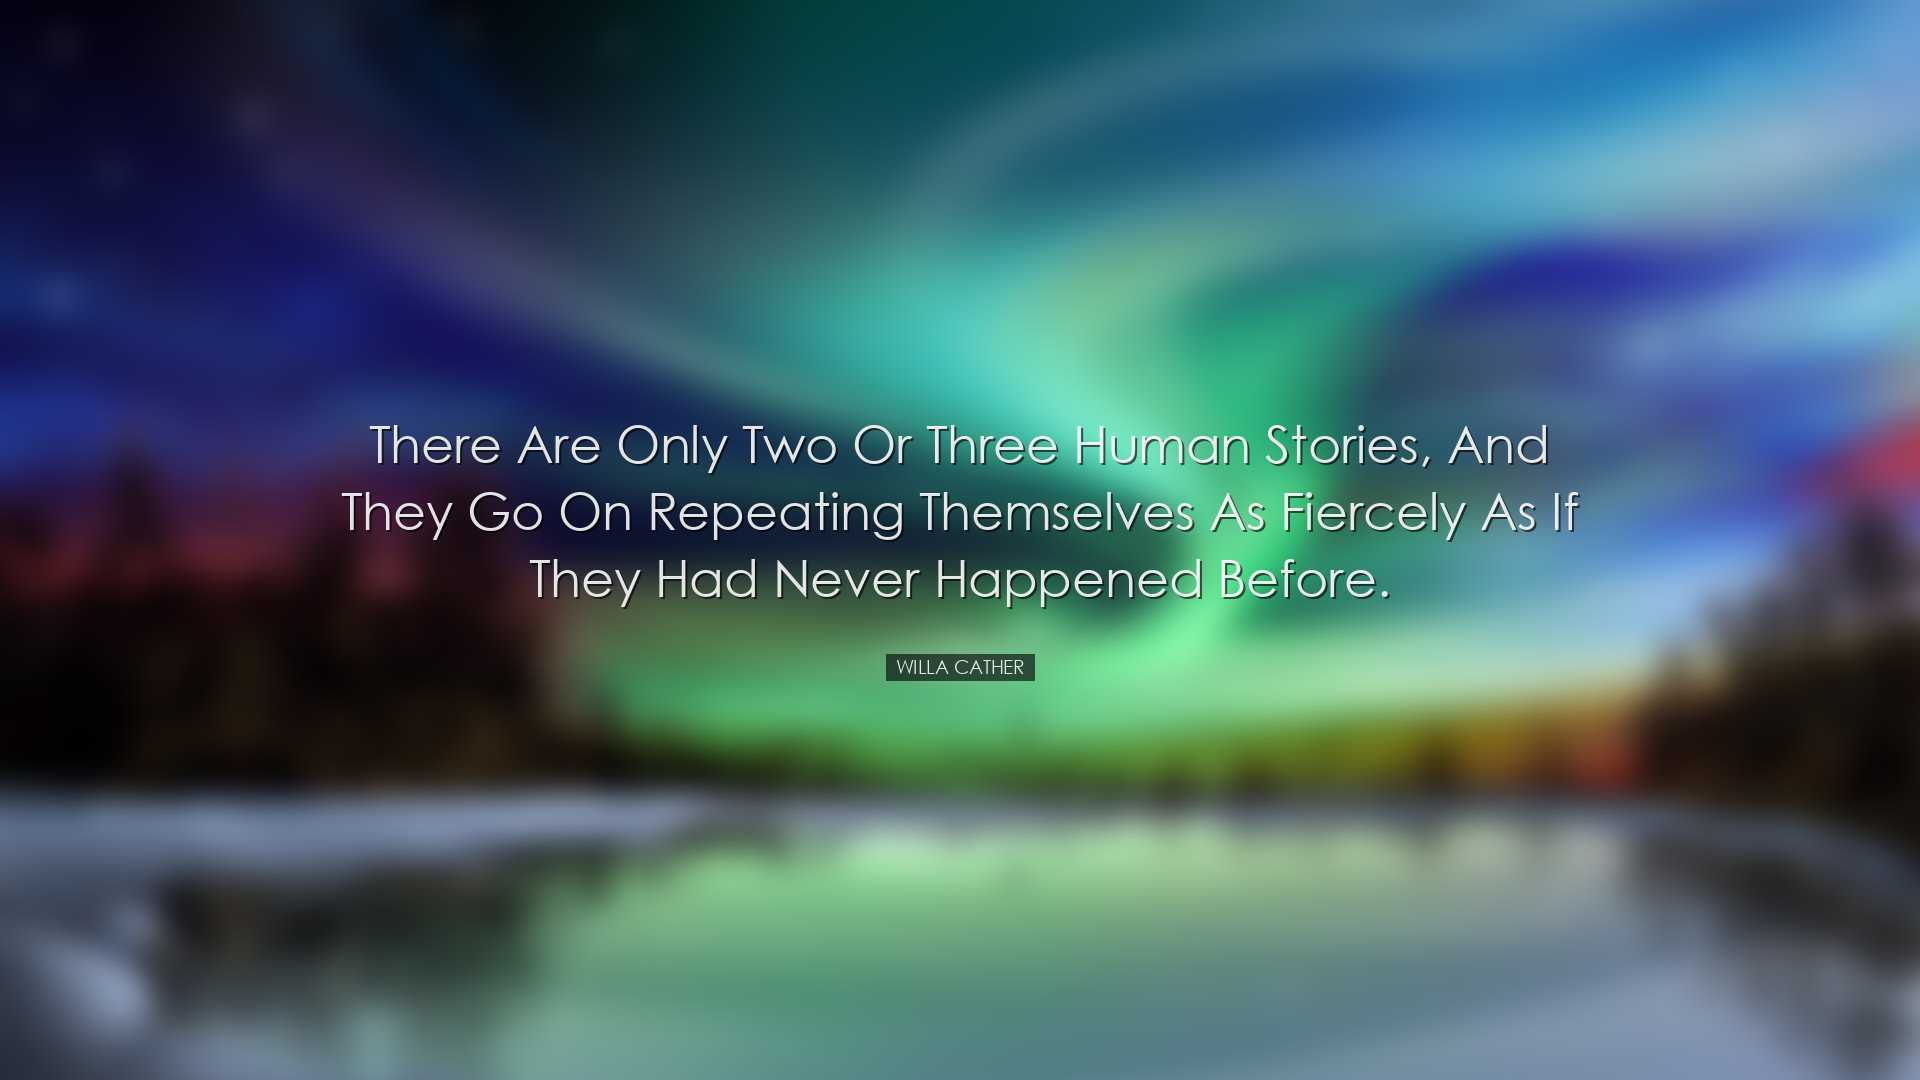 There are only two or three human stories, and they go on repeatin